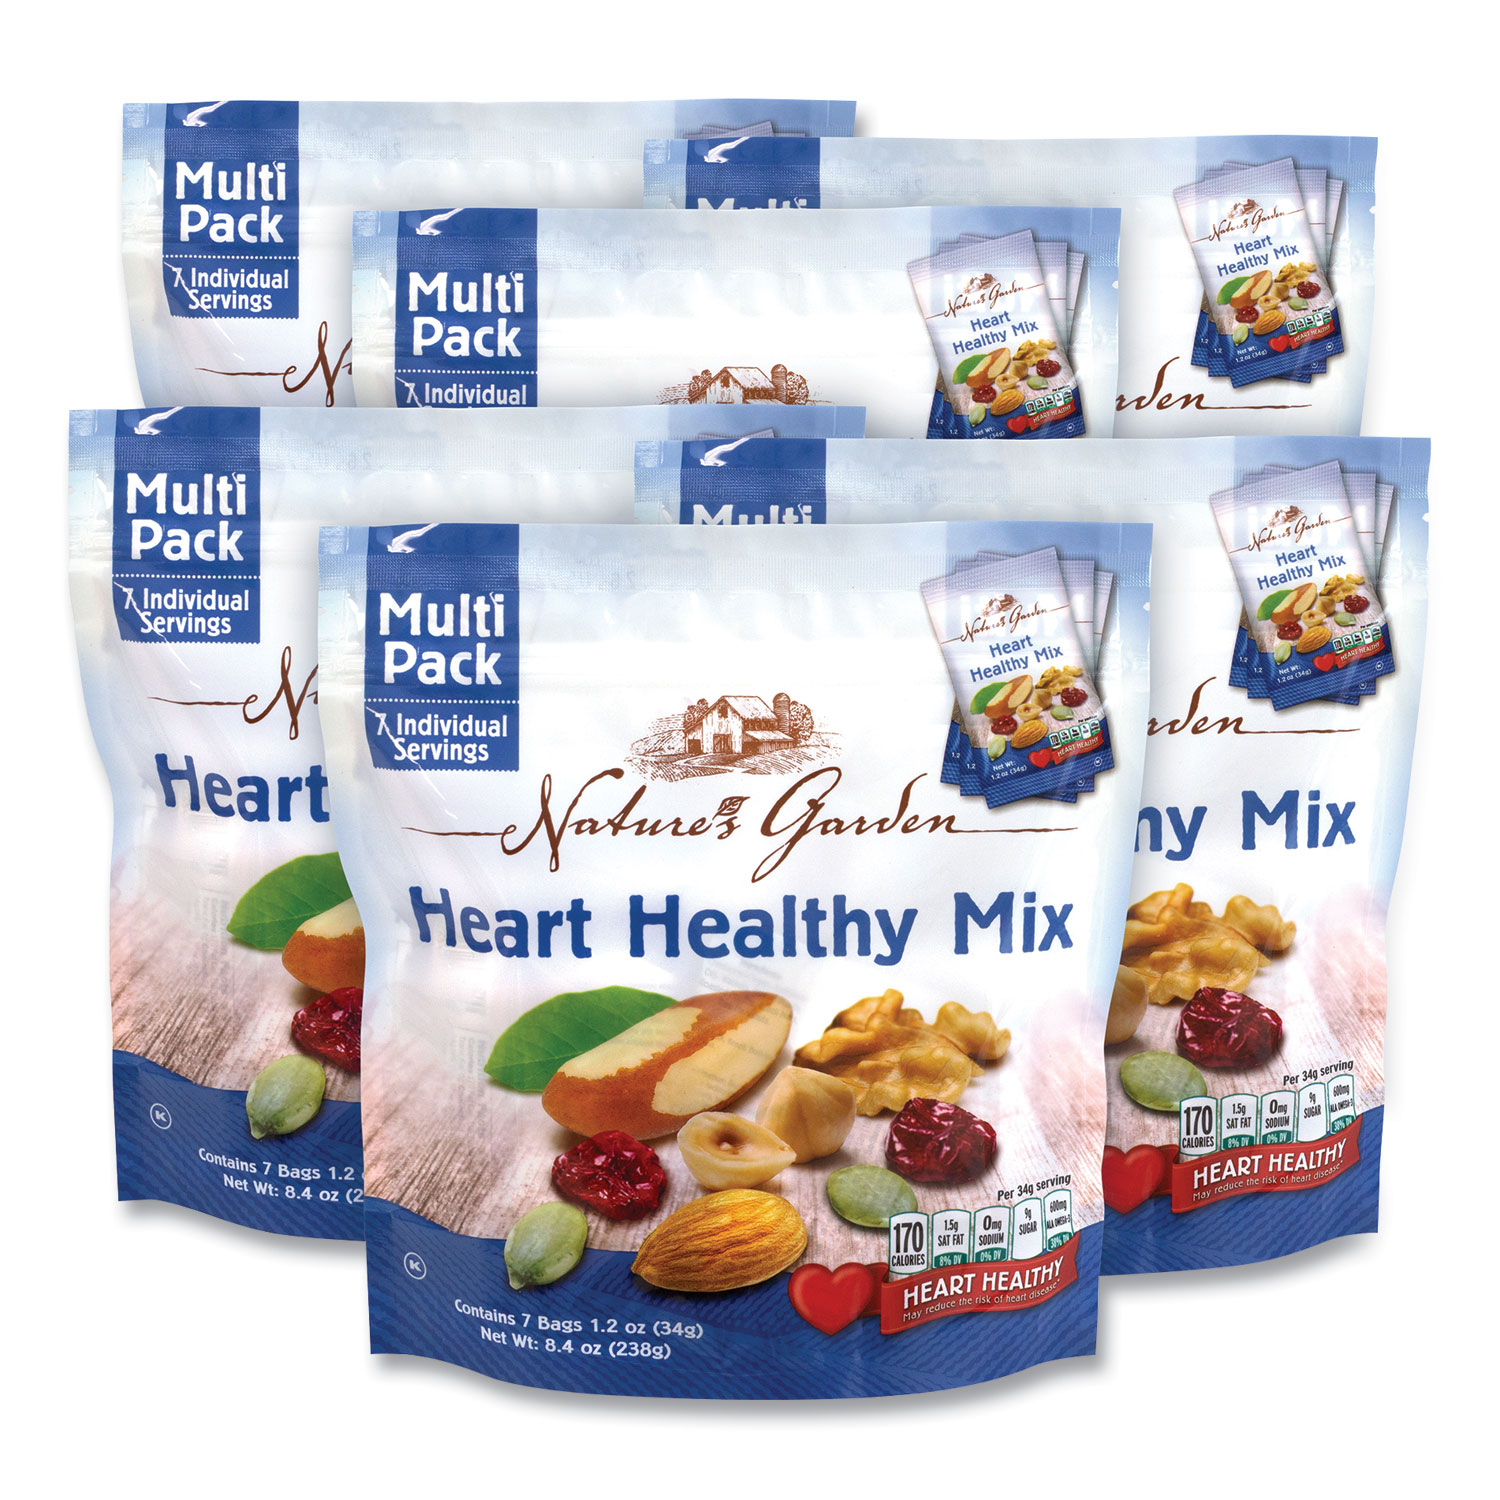  Nature's Garden 7027 Healthy Heart Mix, 1.2 oz Pouch, 7 Pouches/Pack, 6 Packs/Box, Free Delivery in 1-4 Business Days (GRR29400006) 